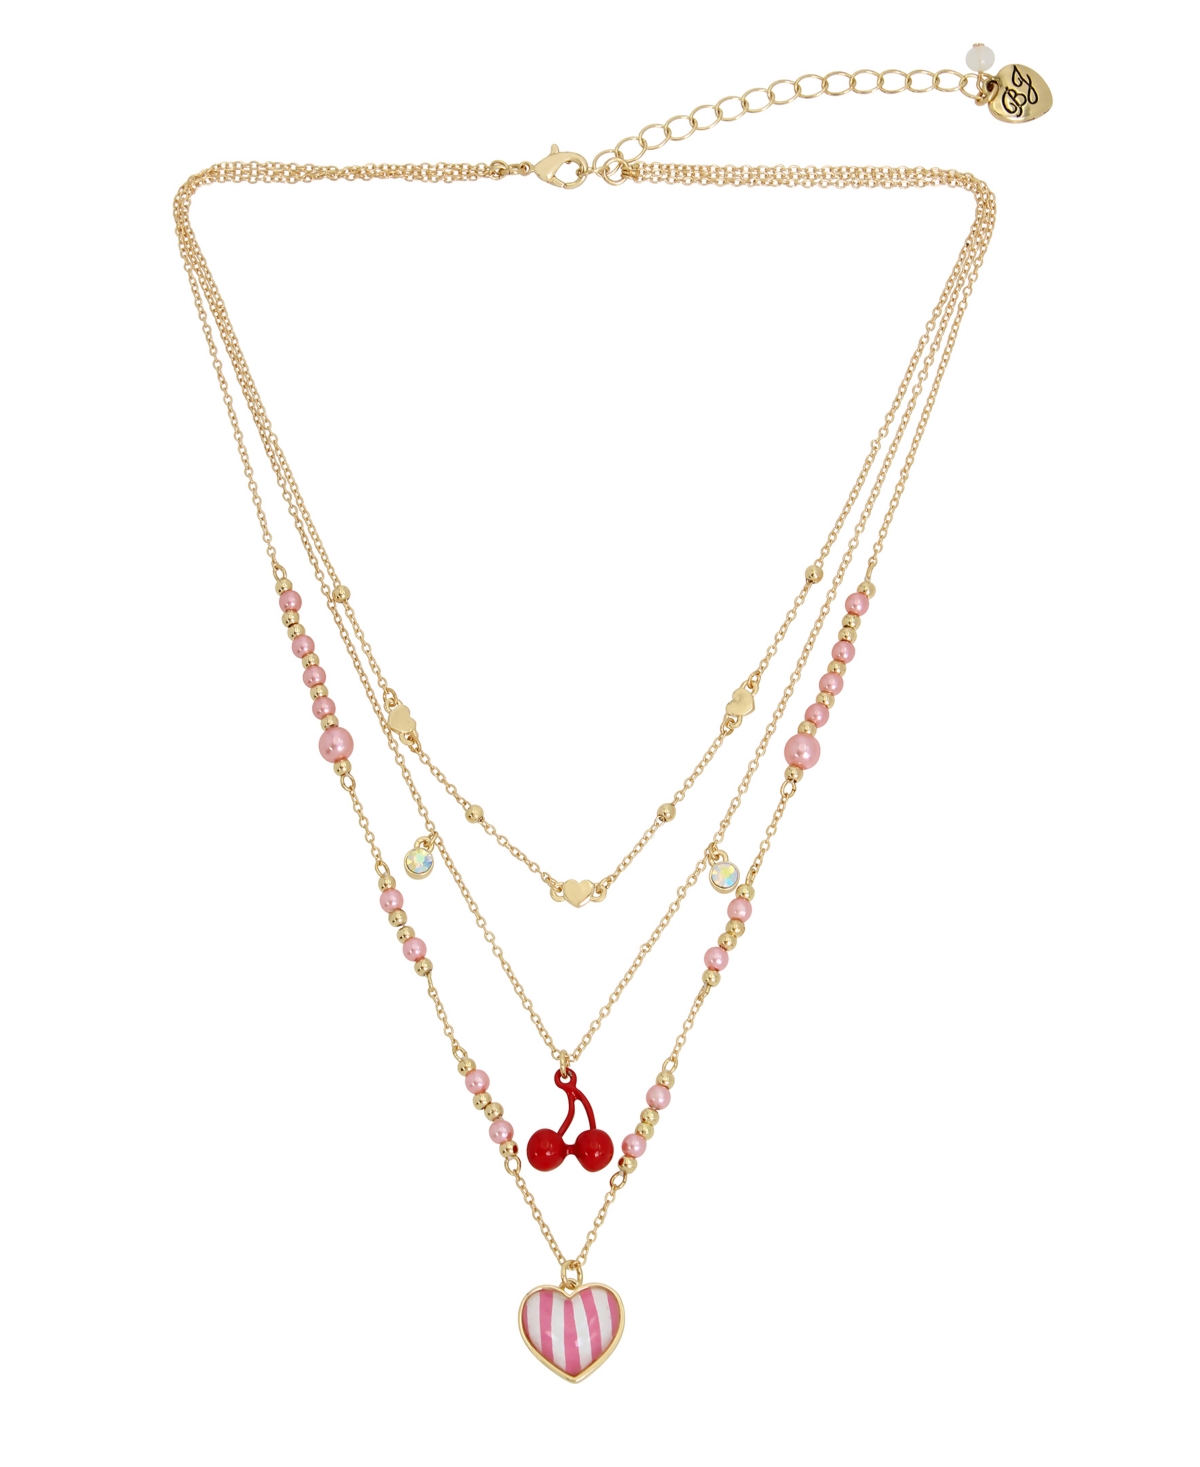 Faux Stone Heart Charm Layered Necklace - Pink